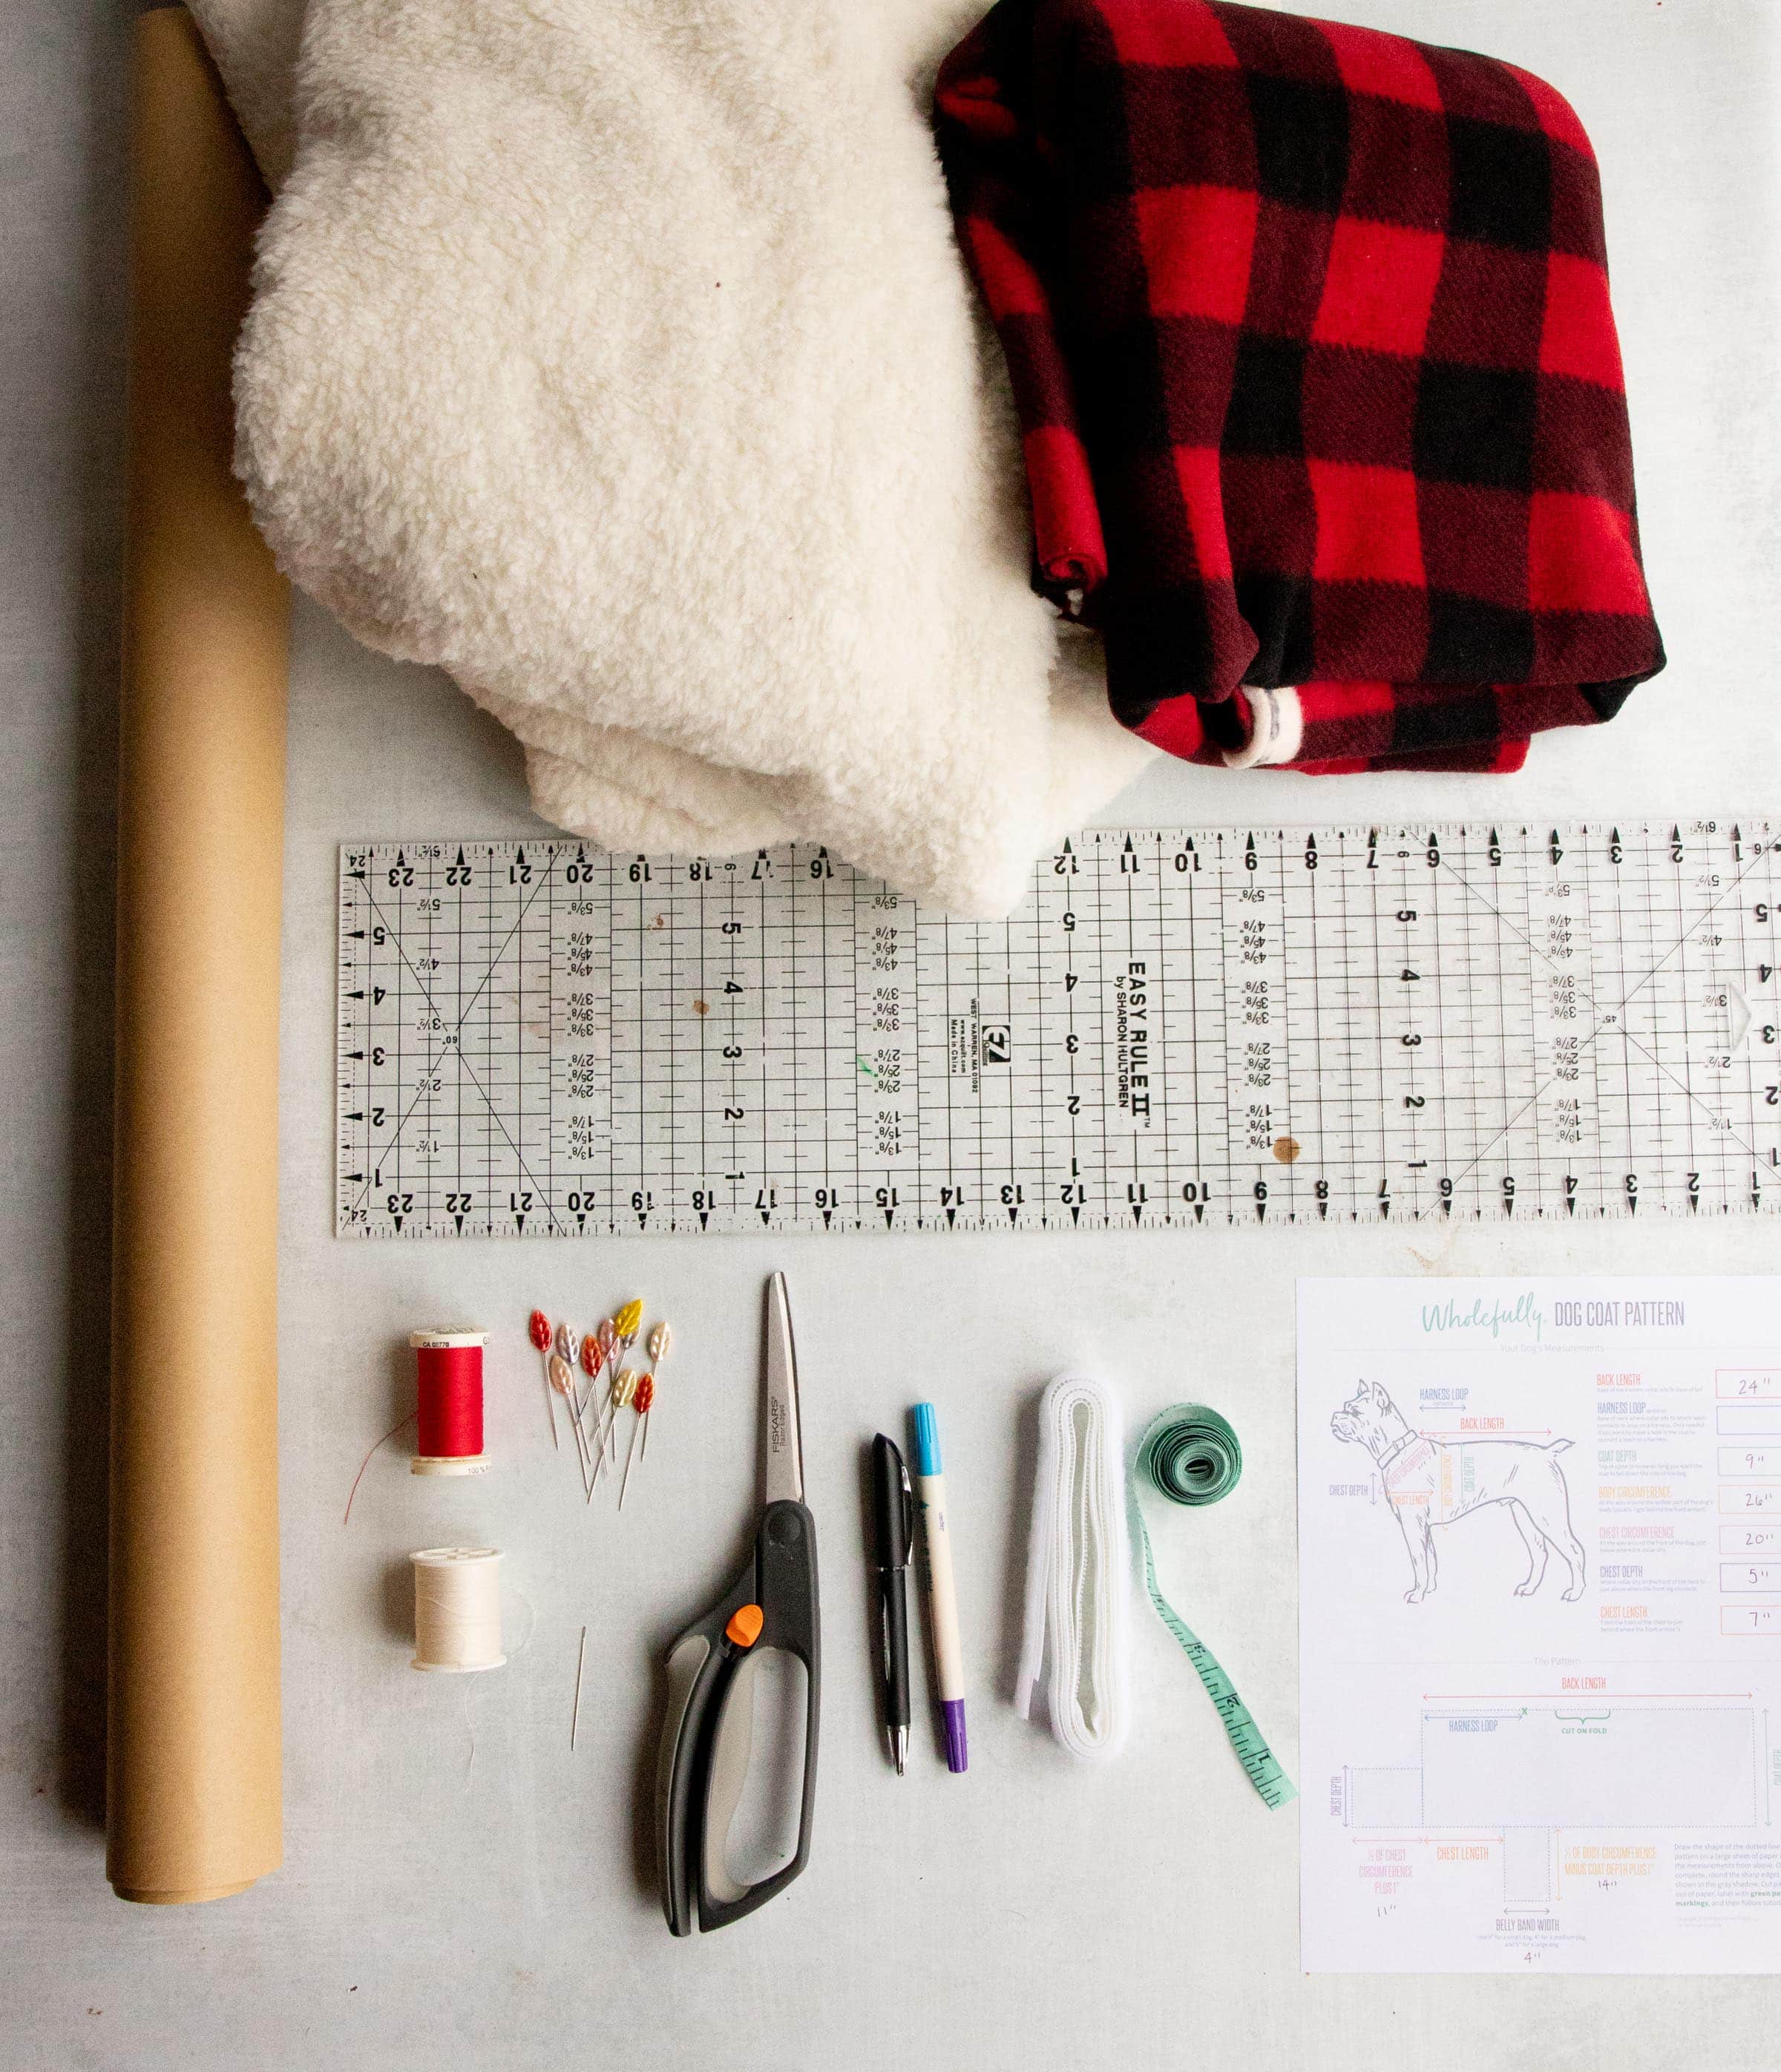 Materials laid out for a custom dog coat - fleece, faux fur, pattern paper, scissors, thread, pins, measuring tap, measurements sheet, and a ruler